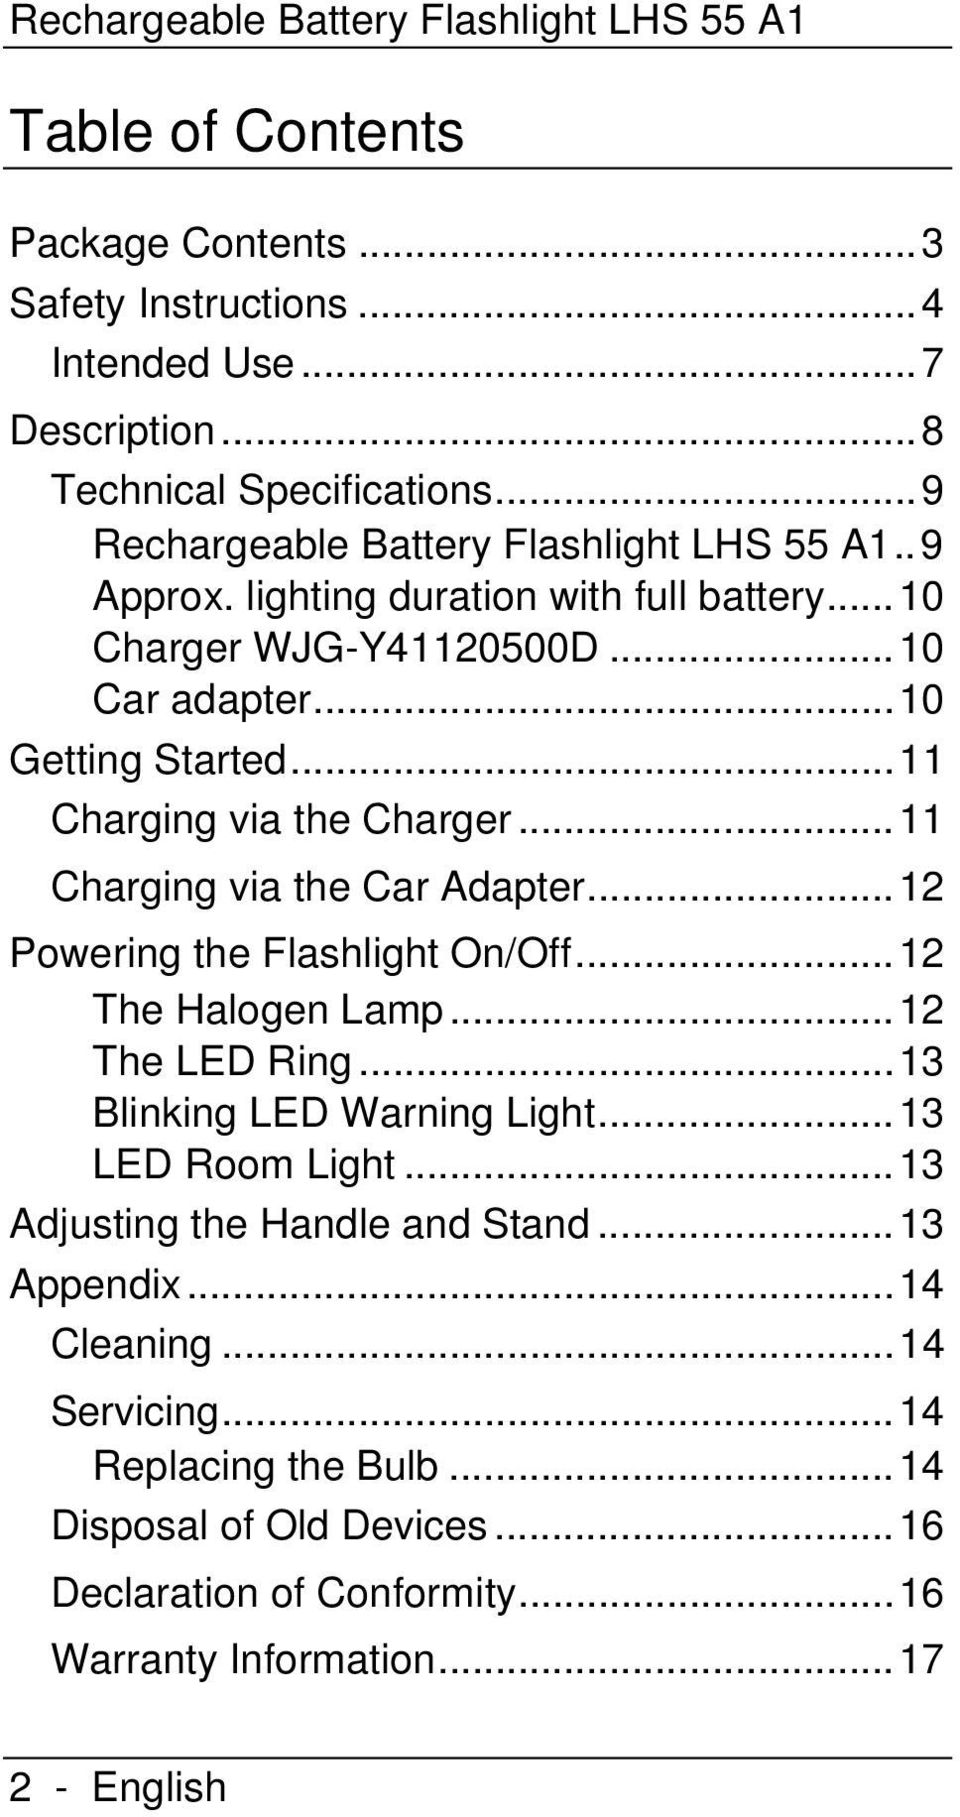 .. 11 Charging via the Charger... 11 Charging via the Car Adapter... 12 Powering the Flashlight On/Off... 12 The Halogen Lamp... 12 The LED Ring... 13 Blinking LED Warning Light.